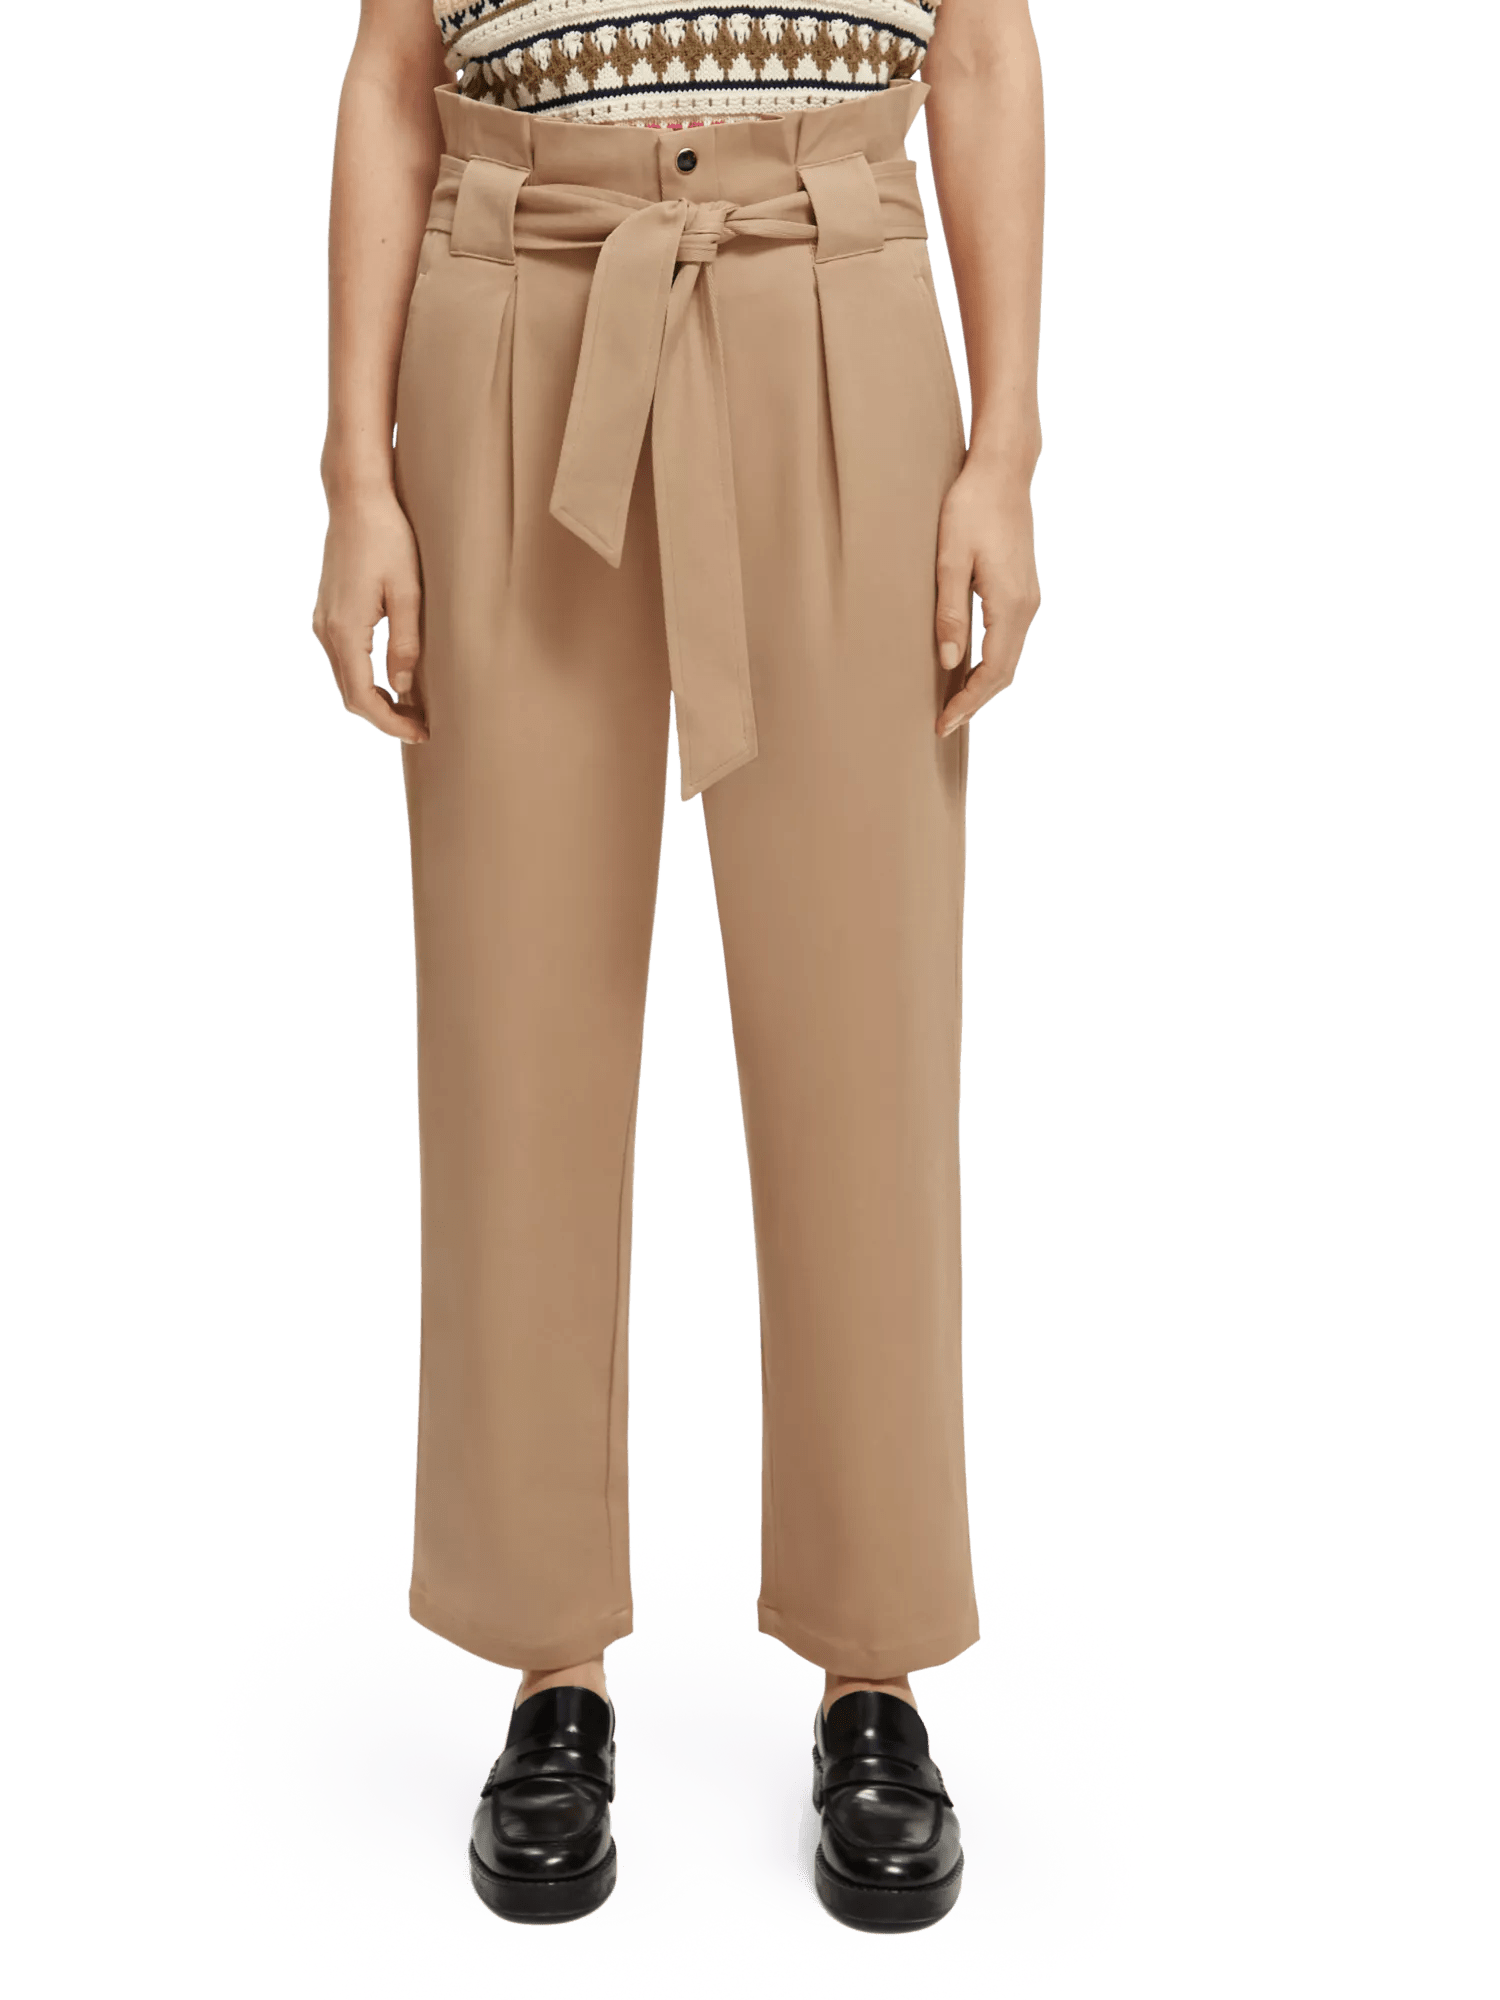 Scotch & Soda The Daisy high-rise paper bag trousers MDL-CRP